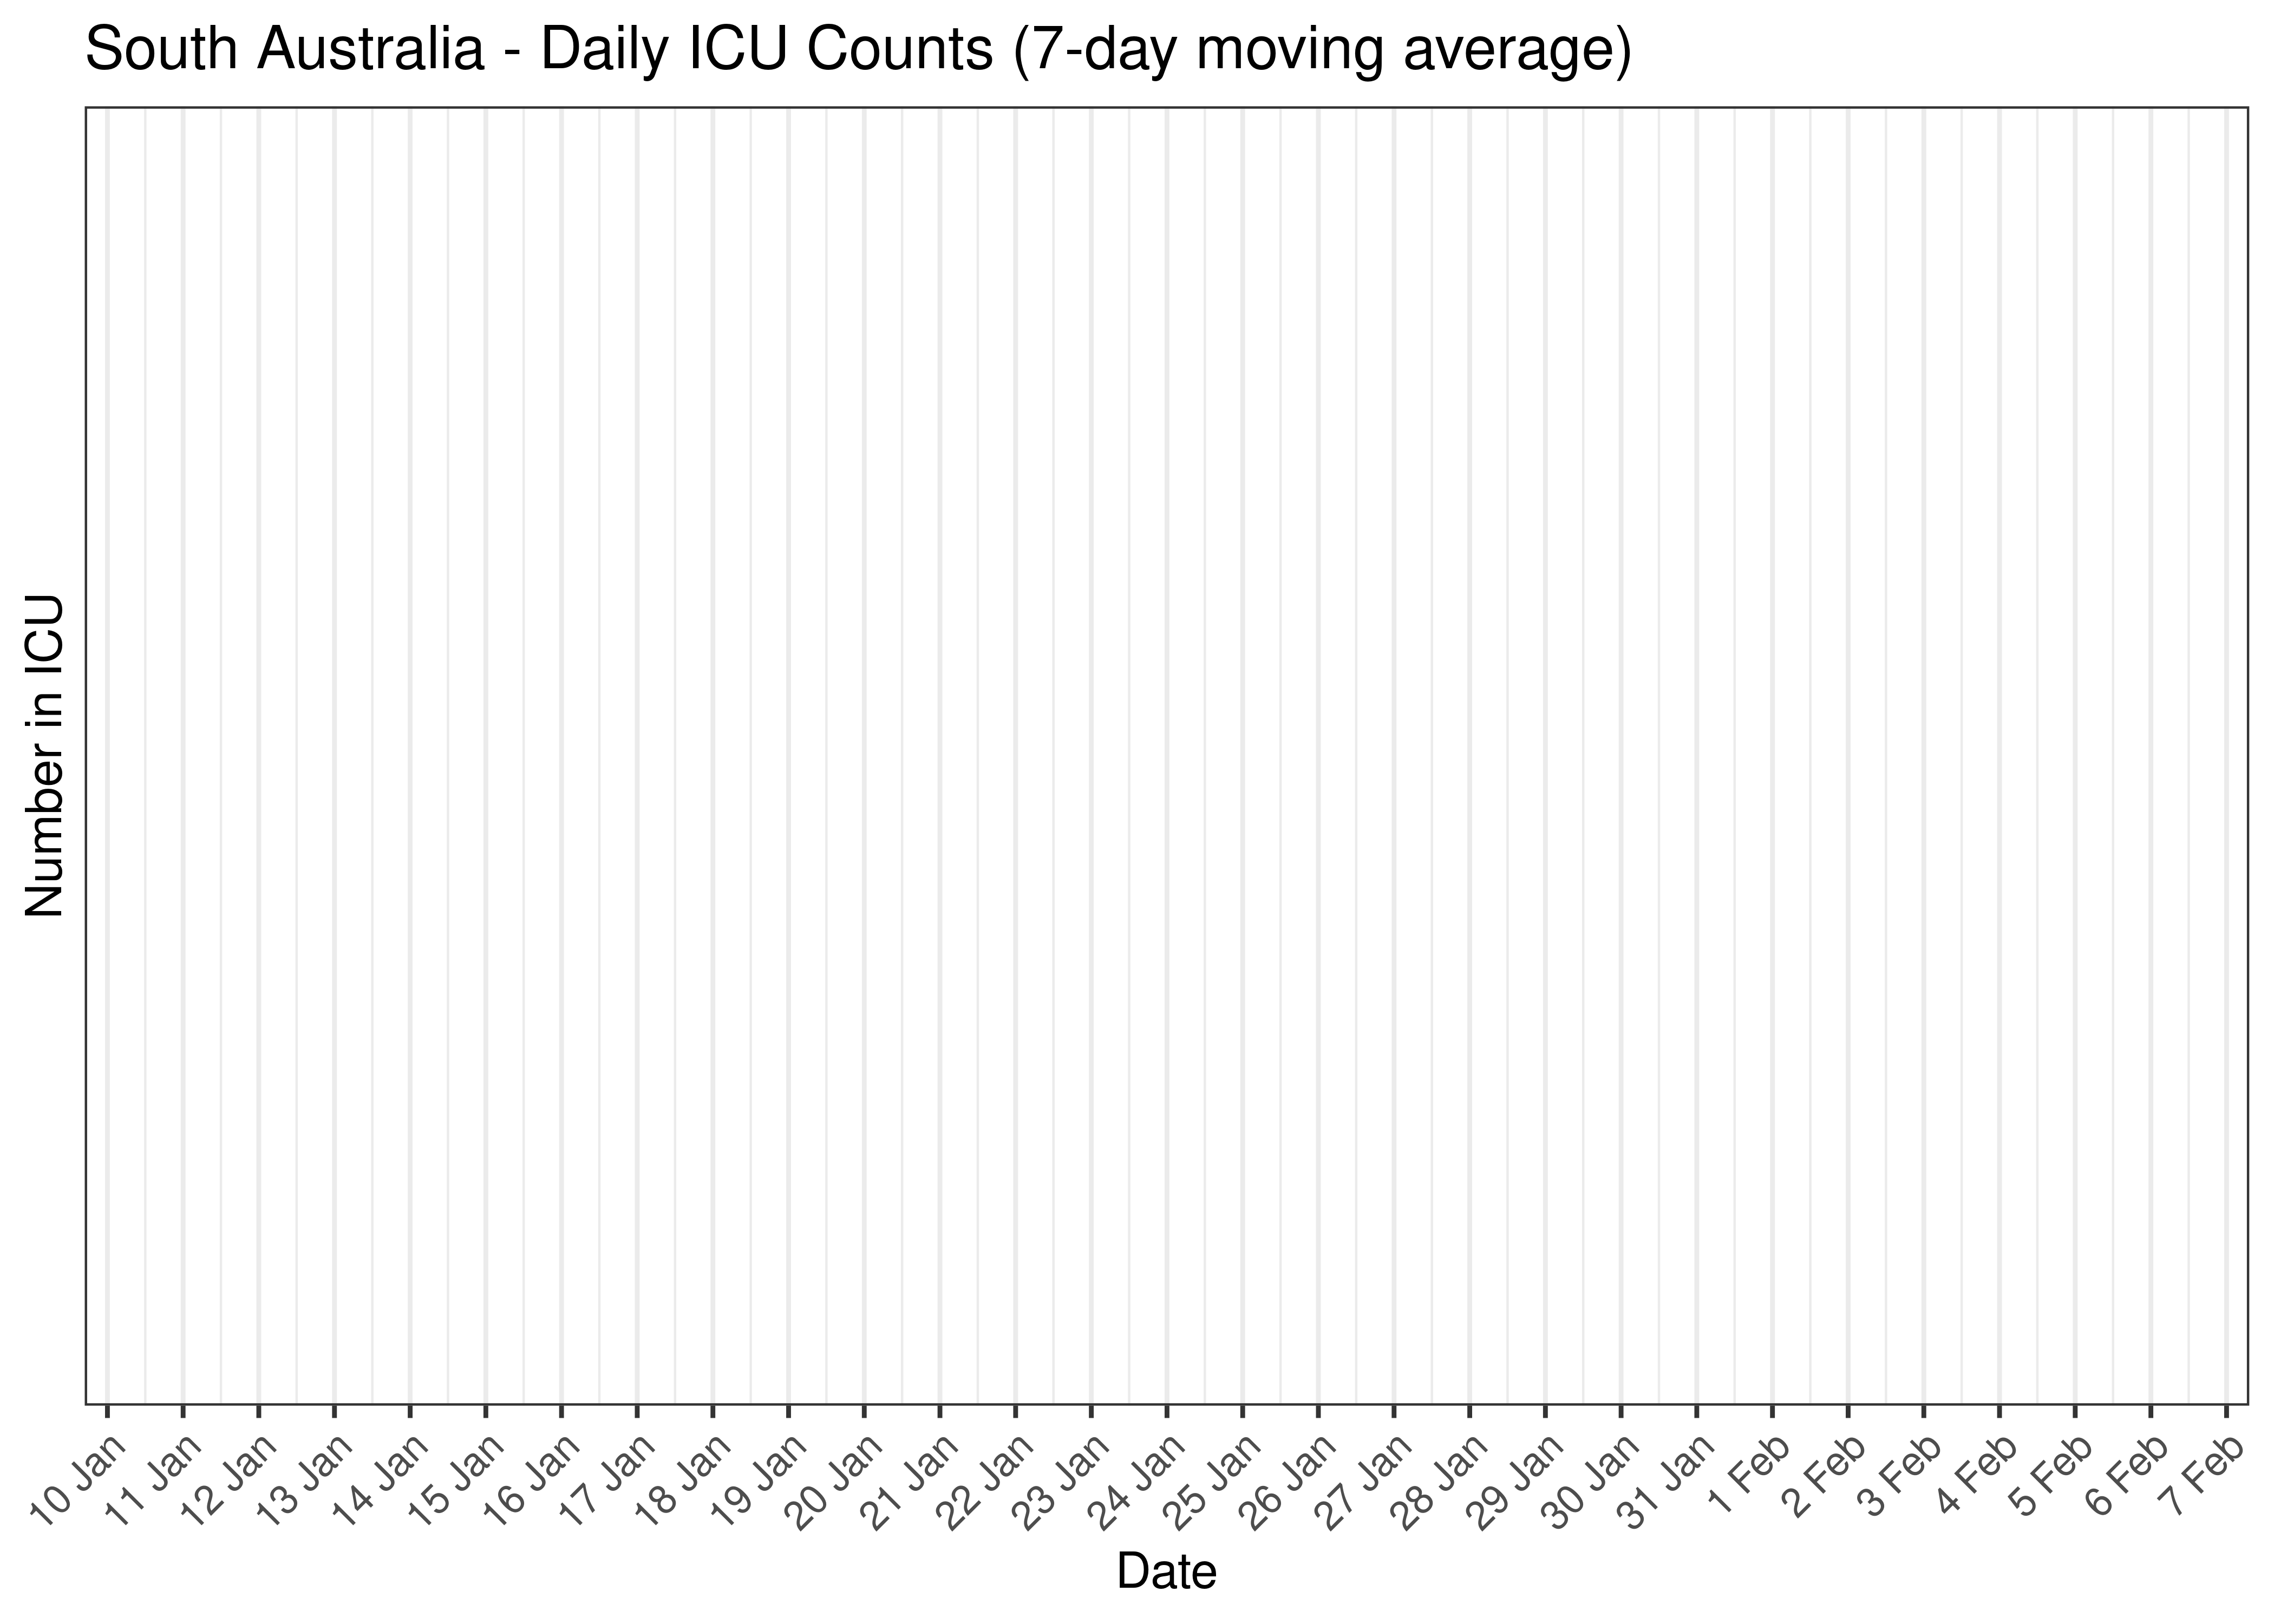 South Australia - Daily ICU Counts for Last 30-days (7-day moving average)